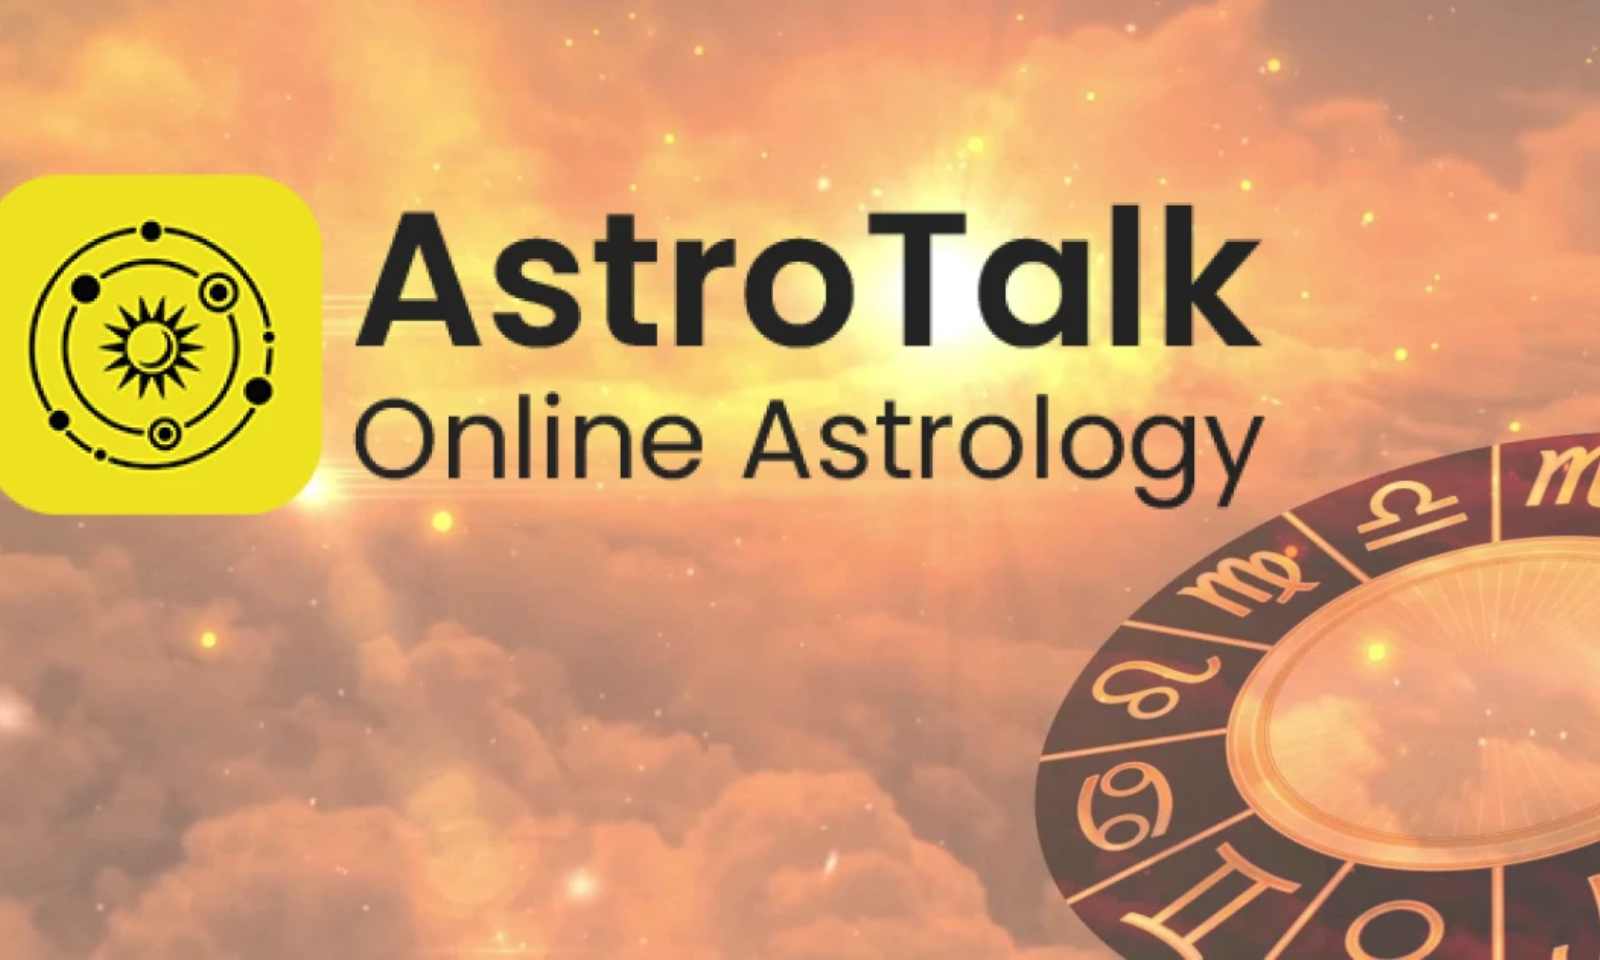 Astrotalk - A Fraud in the Name of Astrology? Popular YouTuber Rips Apart the Platform in Viral Video